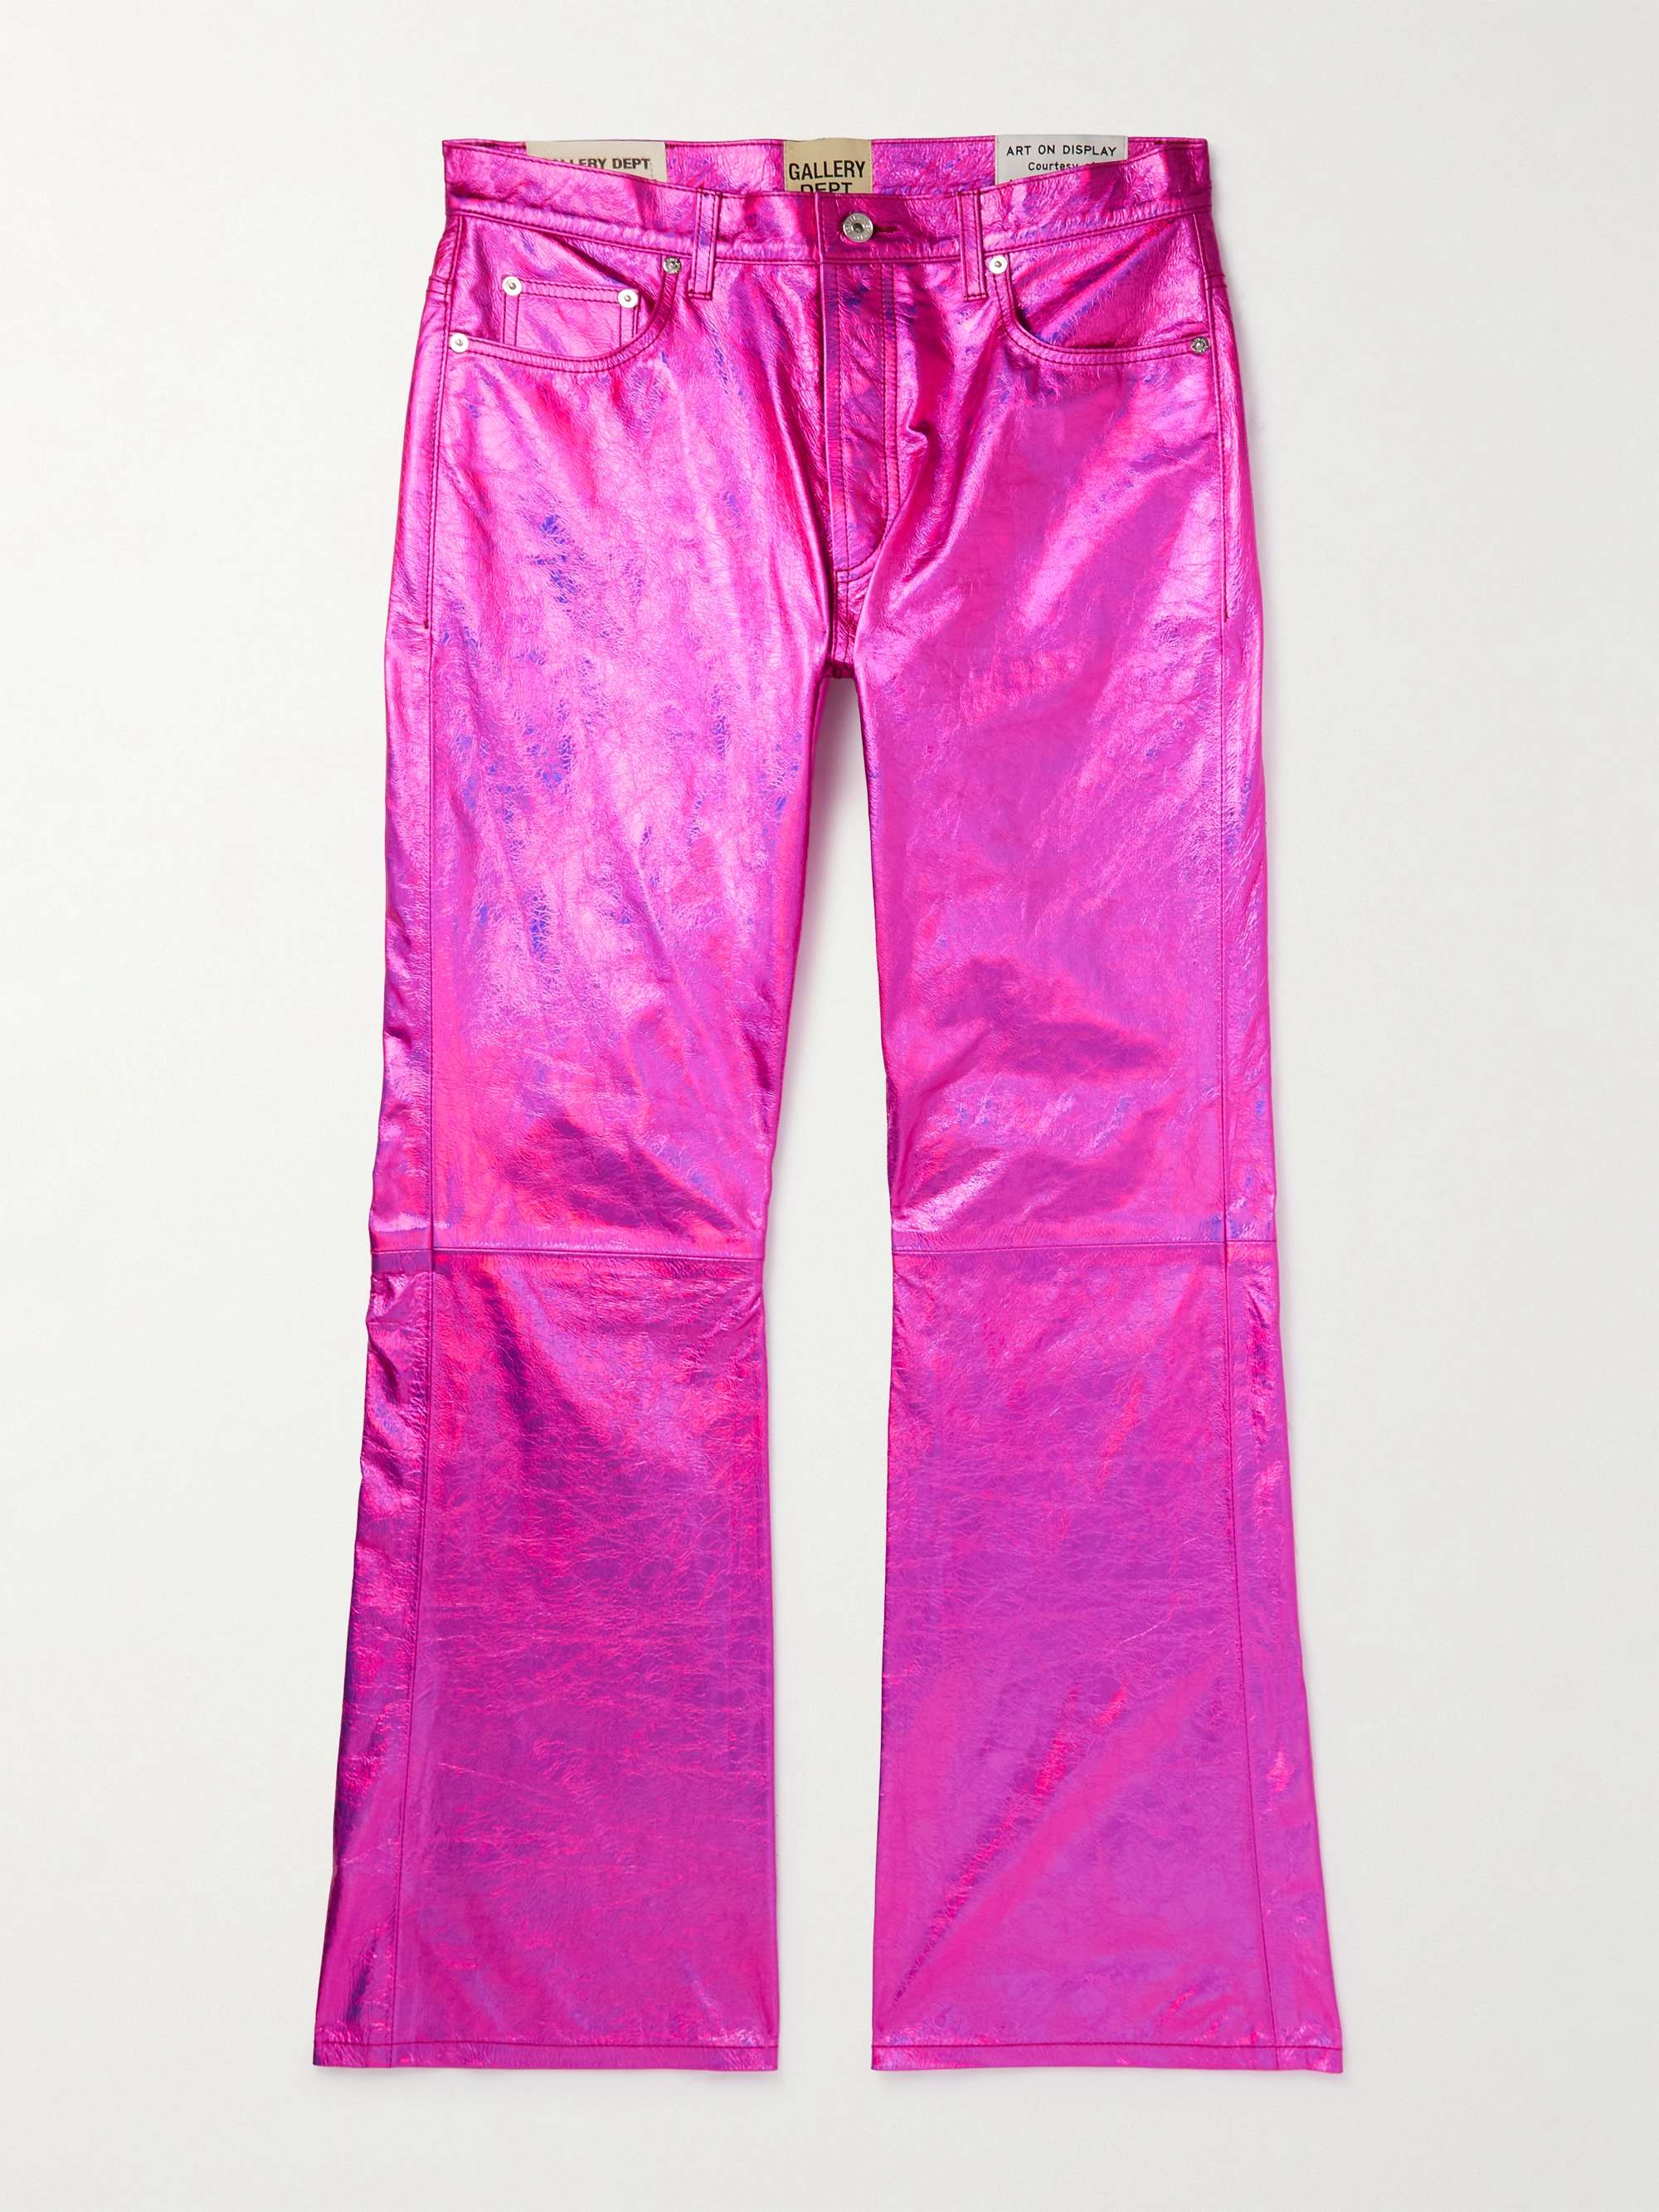 GALLERY DEPT. Logan Galactic Flared Distressed Metallic Crinkled-Leather Trousers